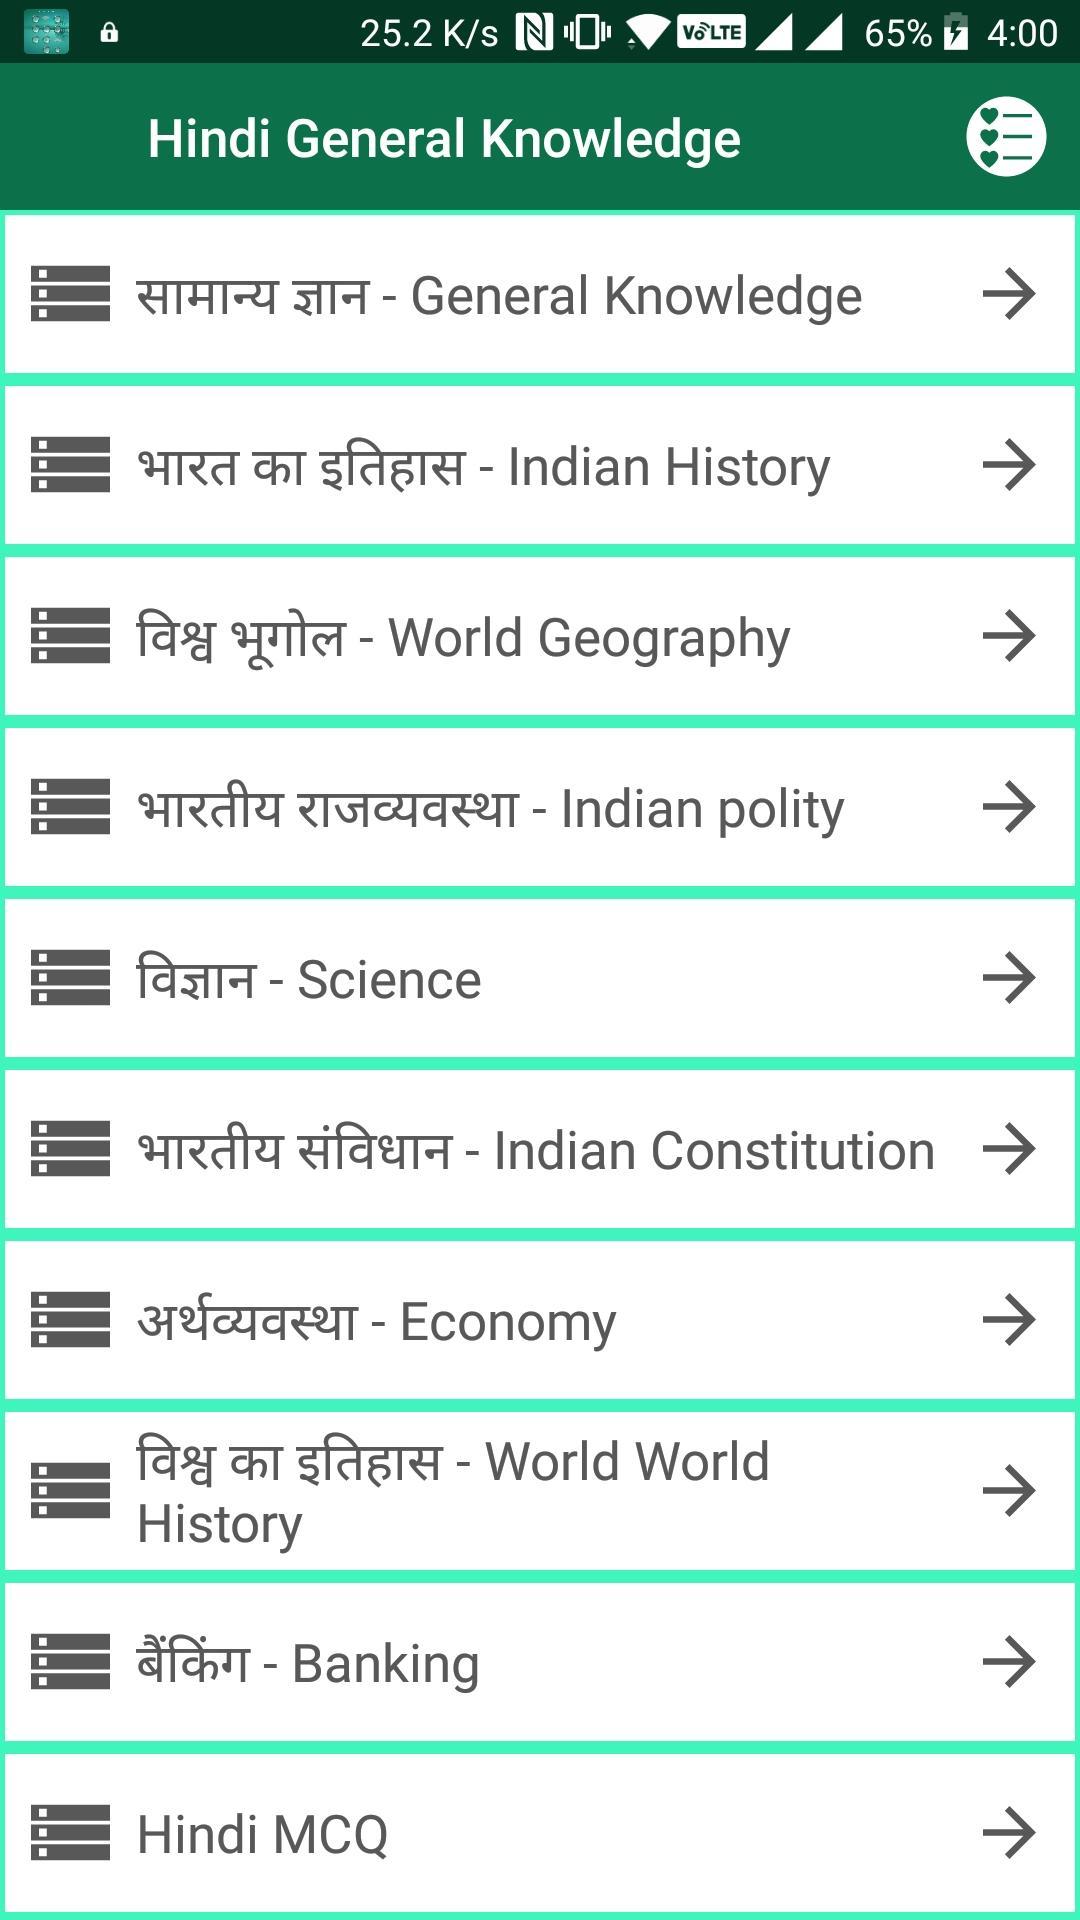 Hindi Gk 2018 Offline For Android Apk Download